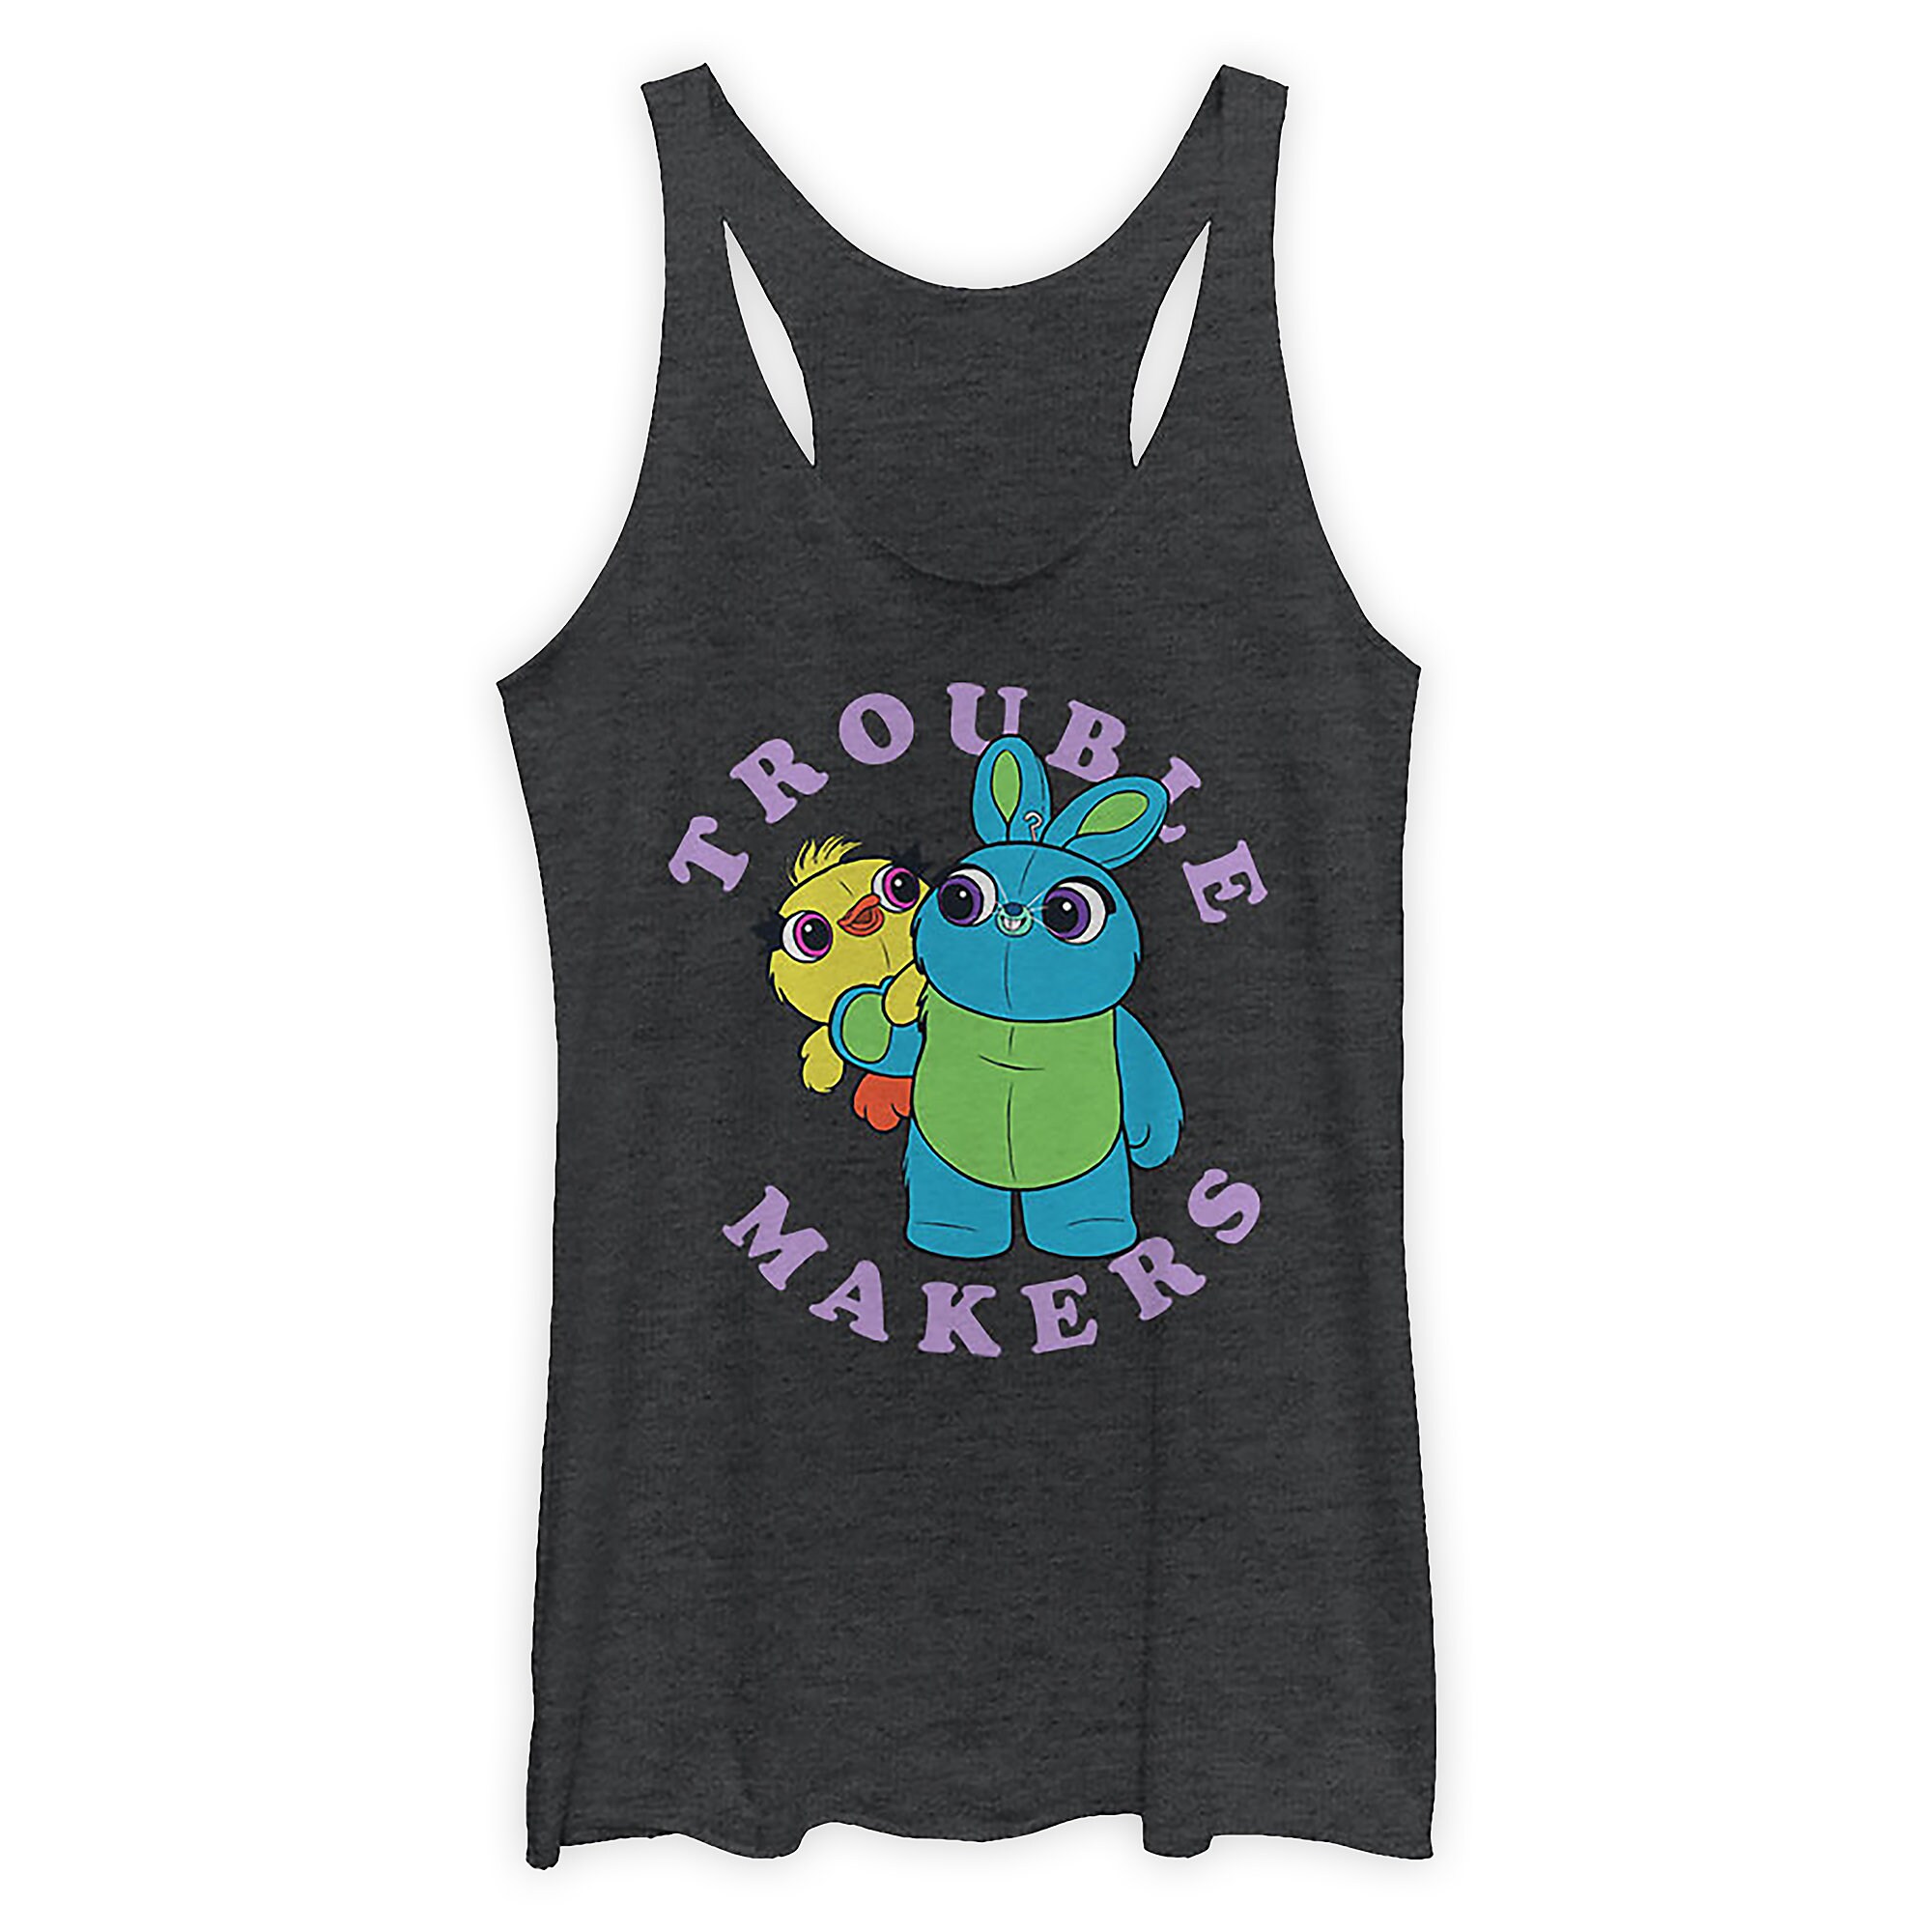 Ducky and Bunny Racerback Tank Top for Women - Toy Story 4